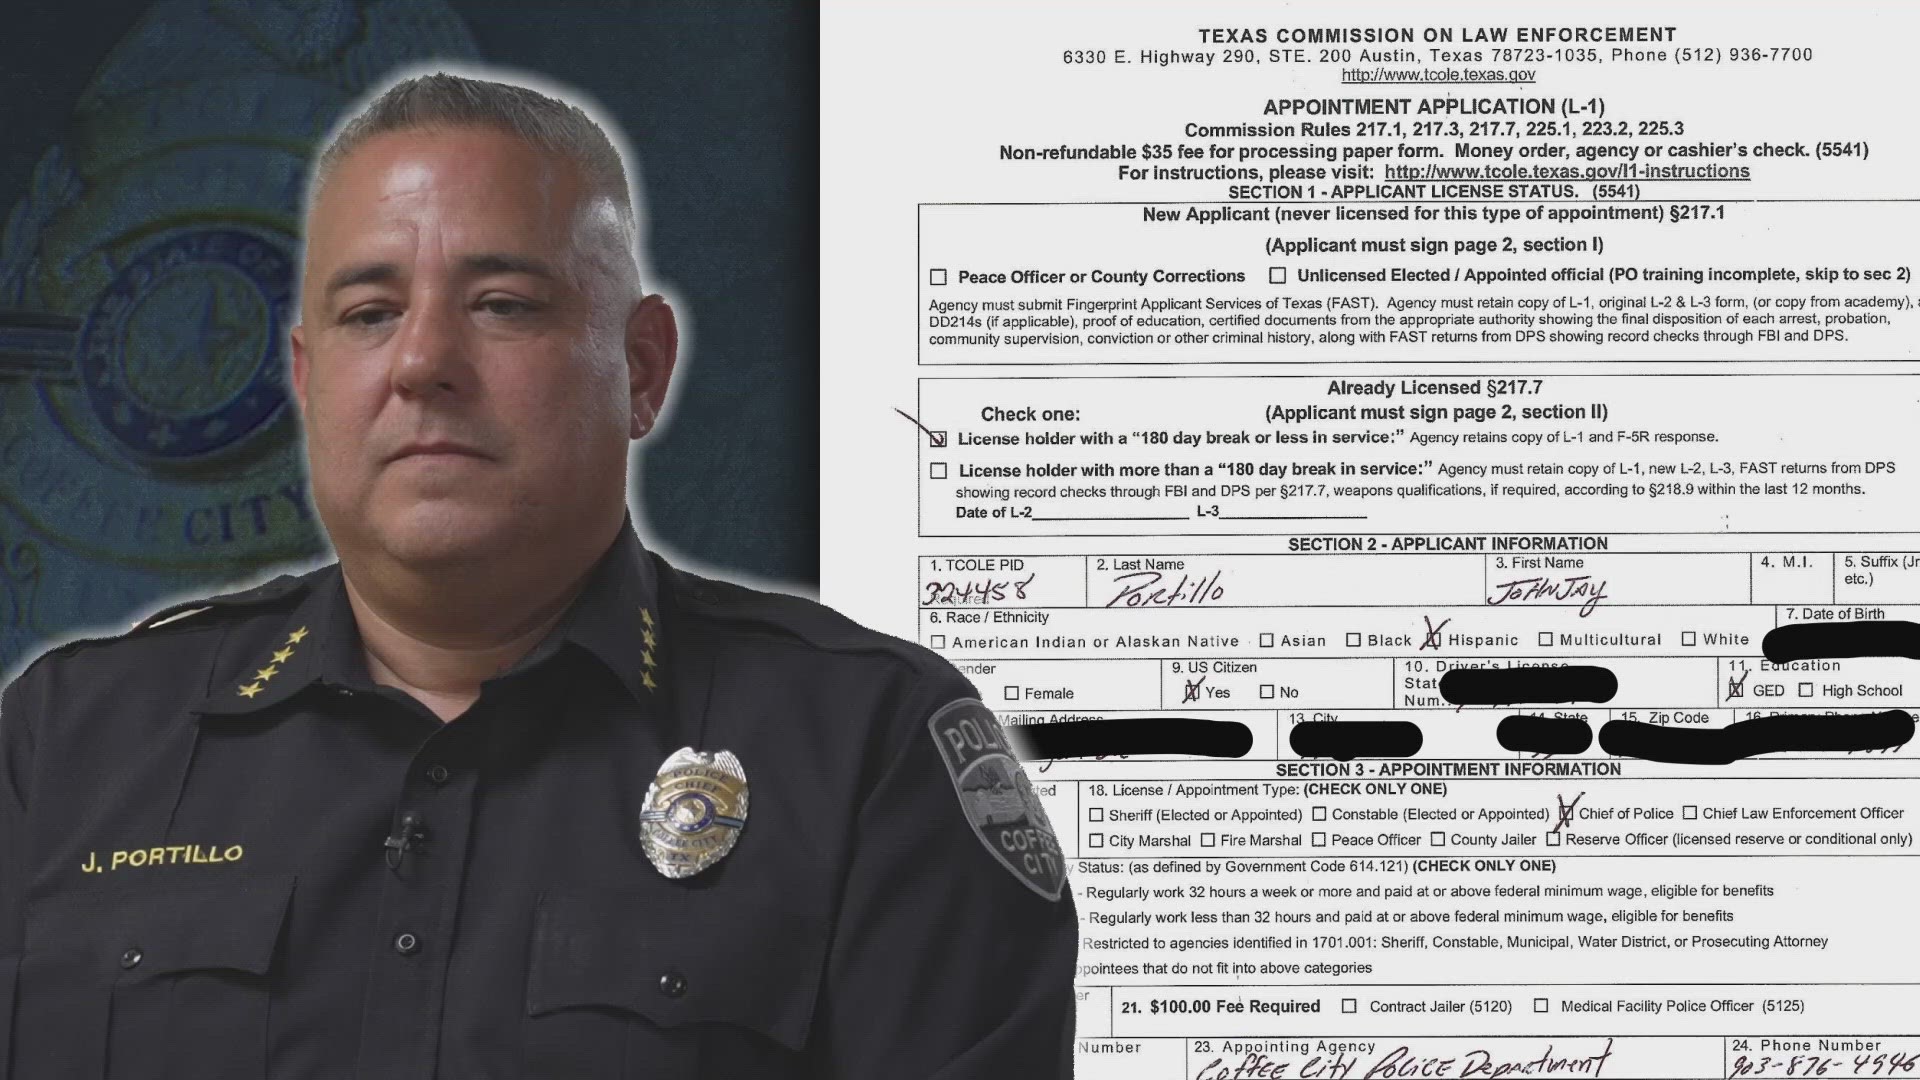 Chief JohnJay Portillo was suspended for 30 days with pay pending an independent investigation.